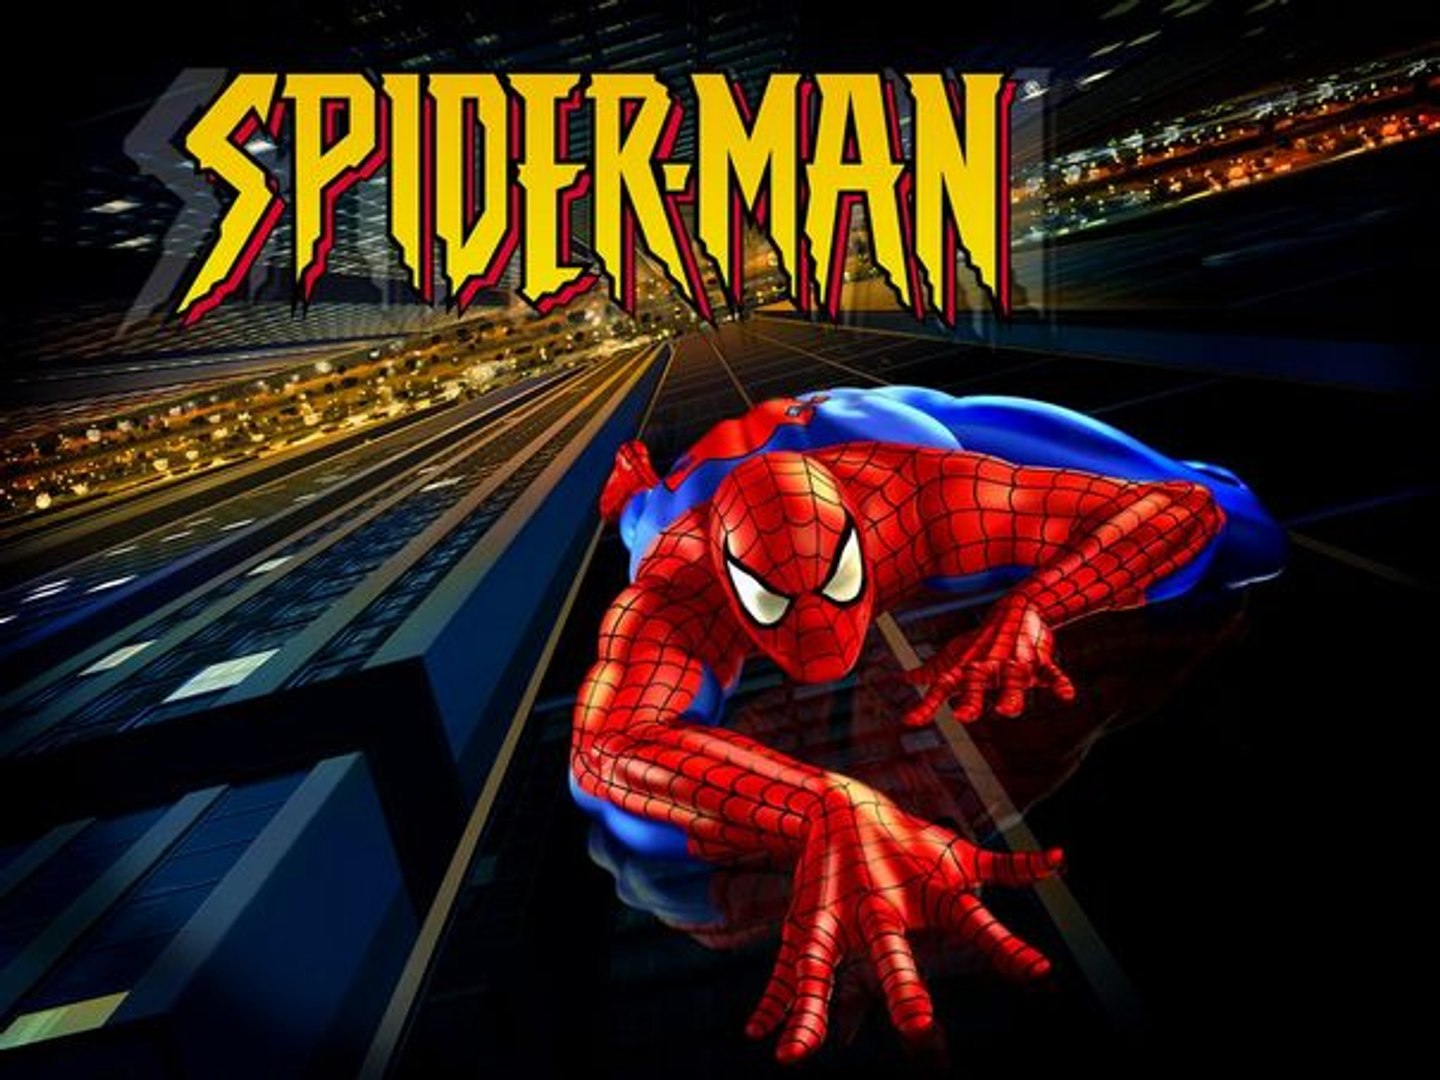 Spider Man The Animated Series 1994 Season 5 Episode 01 - Dailymotion Video